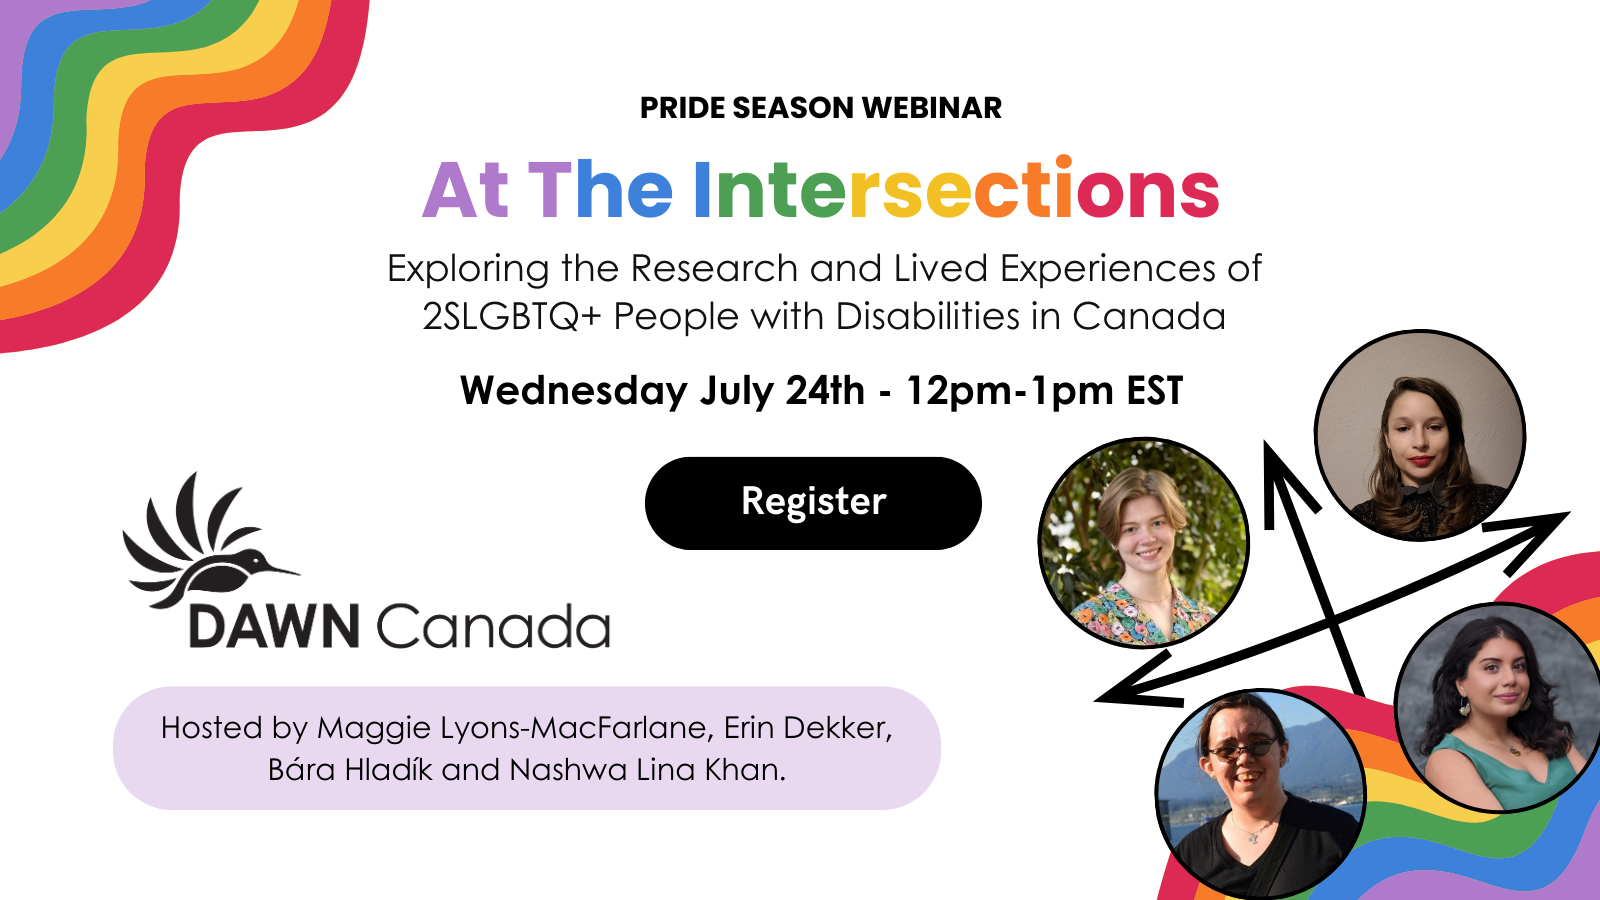  Colorful banner for a Pride Webinar titled "At The Intersections," focusing on the research and experiences of 2SLGBTQ+ People with Disabilities in Canada, scheduled for Wednesday July 24th from 12pm-1pm EST. It features an invitation to register, the logo of DAWN Canada, and is hosted by Maggie Lyons-MacFarlane, Erin Dekker, Bára Hladik, and Nashwa Lina Khan. The banner includes stylized portraits of the four hosts outlined by intersecting arrows. 